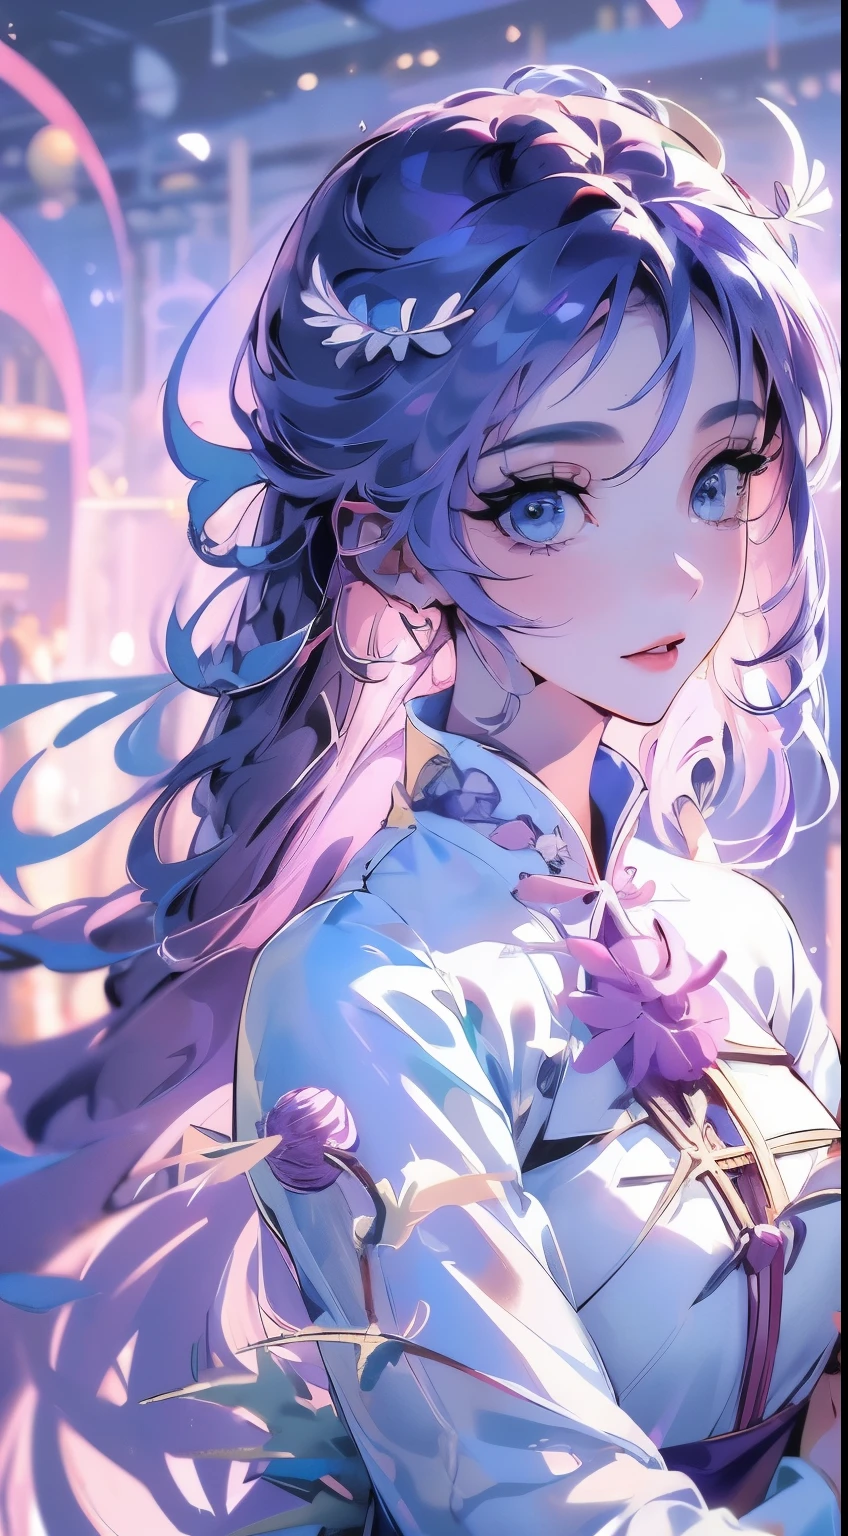 masterpiece , detailed image , detailed eyes , beautiful eyes , detailed hair , detailed hands , normal hands , detailed fingers , normal fingers , 1girl , solo , 19 year old girl , beautiful girl ,  cute girl , (Light Sky Blue eyes:1.5), sparkling eyes, bright eyes, (long hair), waist length hair, ((Thistle purple-colored hair:1.5)), (bangs hairs:1.5), (happy expression:1.5), big smile, cute emotion, big eyes , ((wearing an oversized  Carnation pink-colored innovative Ao dai :1.5 )), a cute innovative Ao dai,Modern design of Ao dai, (Decorative motifs on the ao dai use Uranian Blue color:1.5) , (Aodai clothes:1.5) ,The ao dai has some Fairy Tale colors to decorate it, Cute action, lovely pose, (white background:1.5), cinema light background, blurred background , cowboy shot , look the viewer